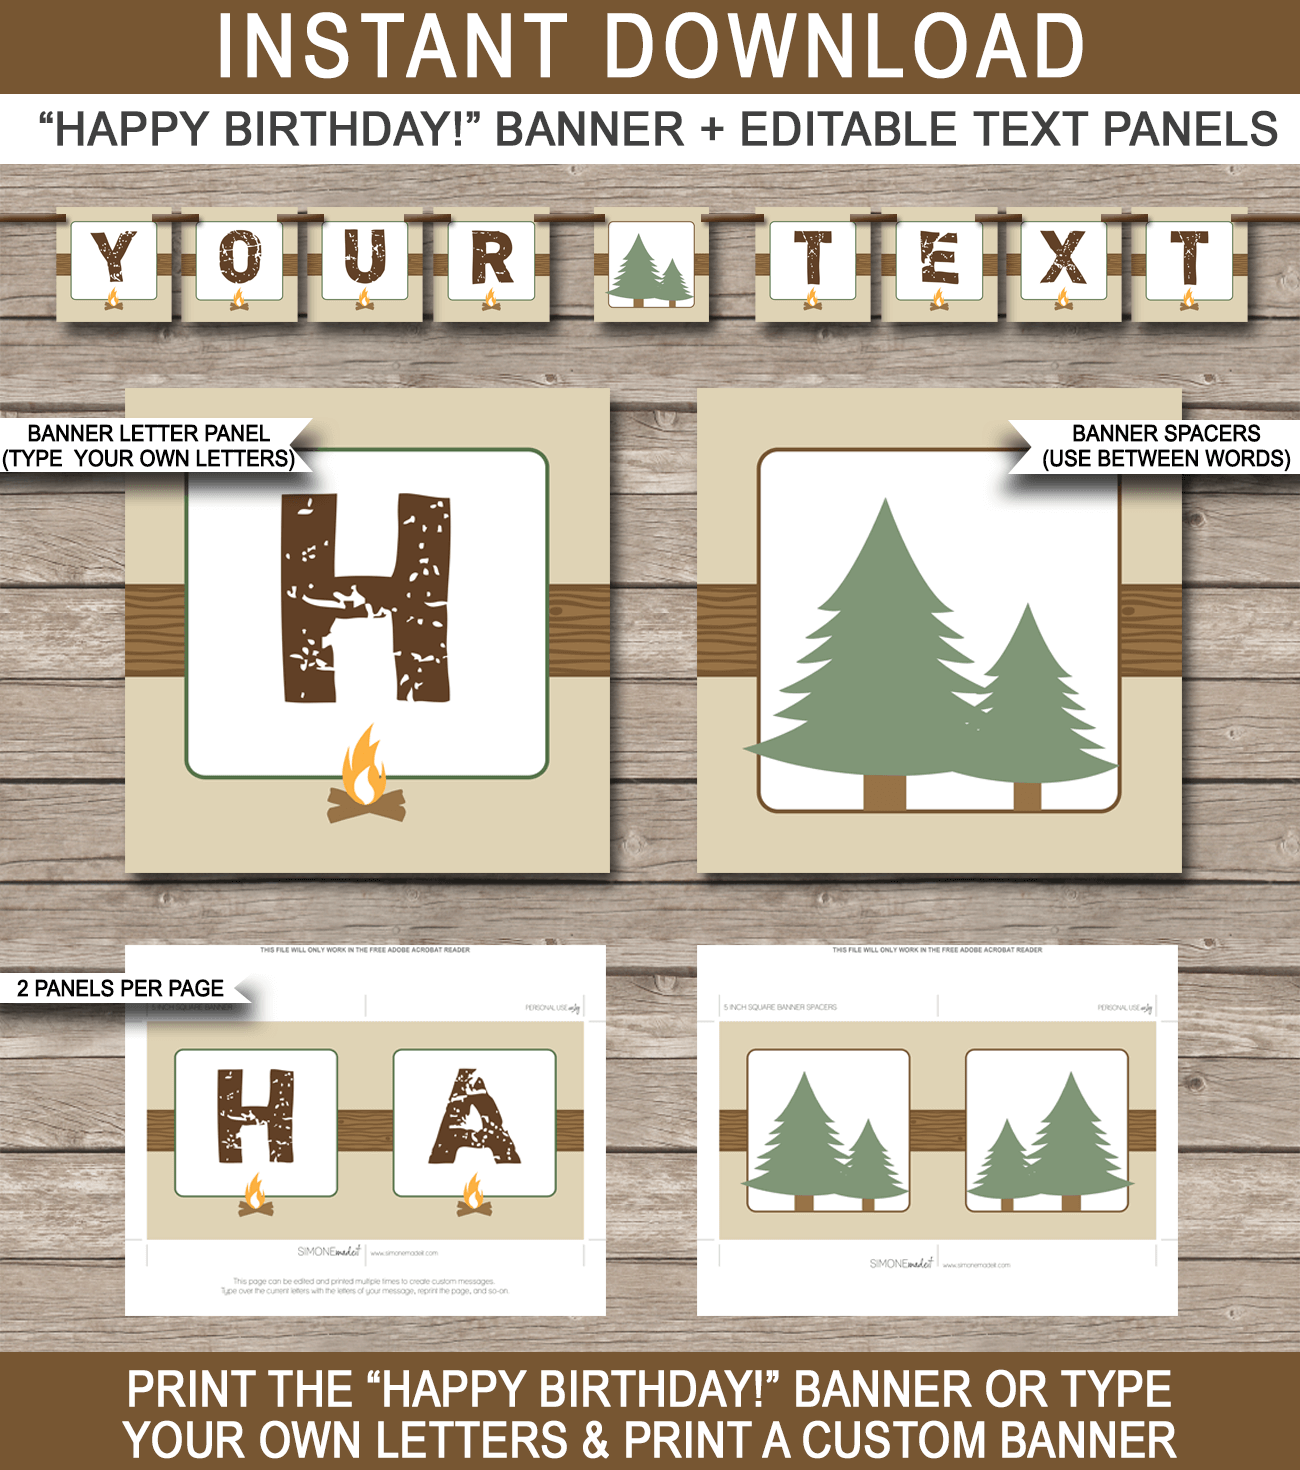 Camping Party Banner Template - Camping Bunting - Happy Birthday Banner - Birthday Party - Editable and Printable DIY Templates - INSTANT DOWNLOAD $4.50 via simonemadeit.com